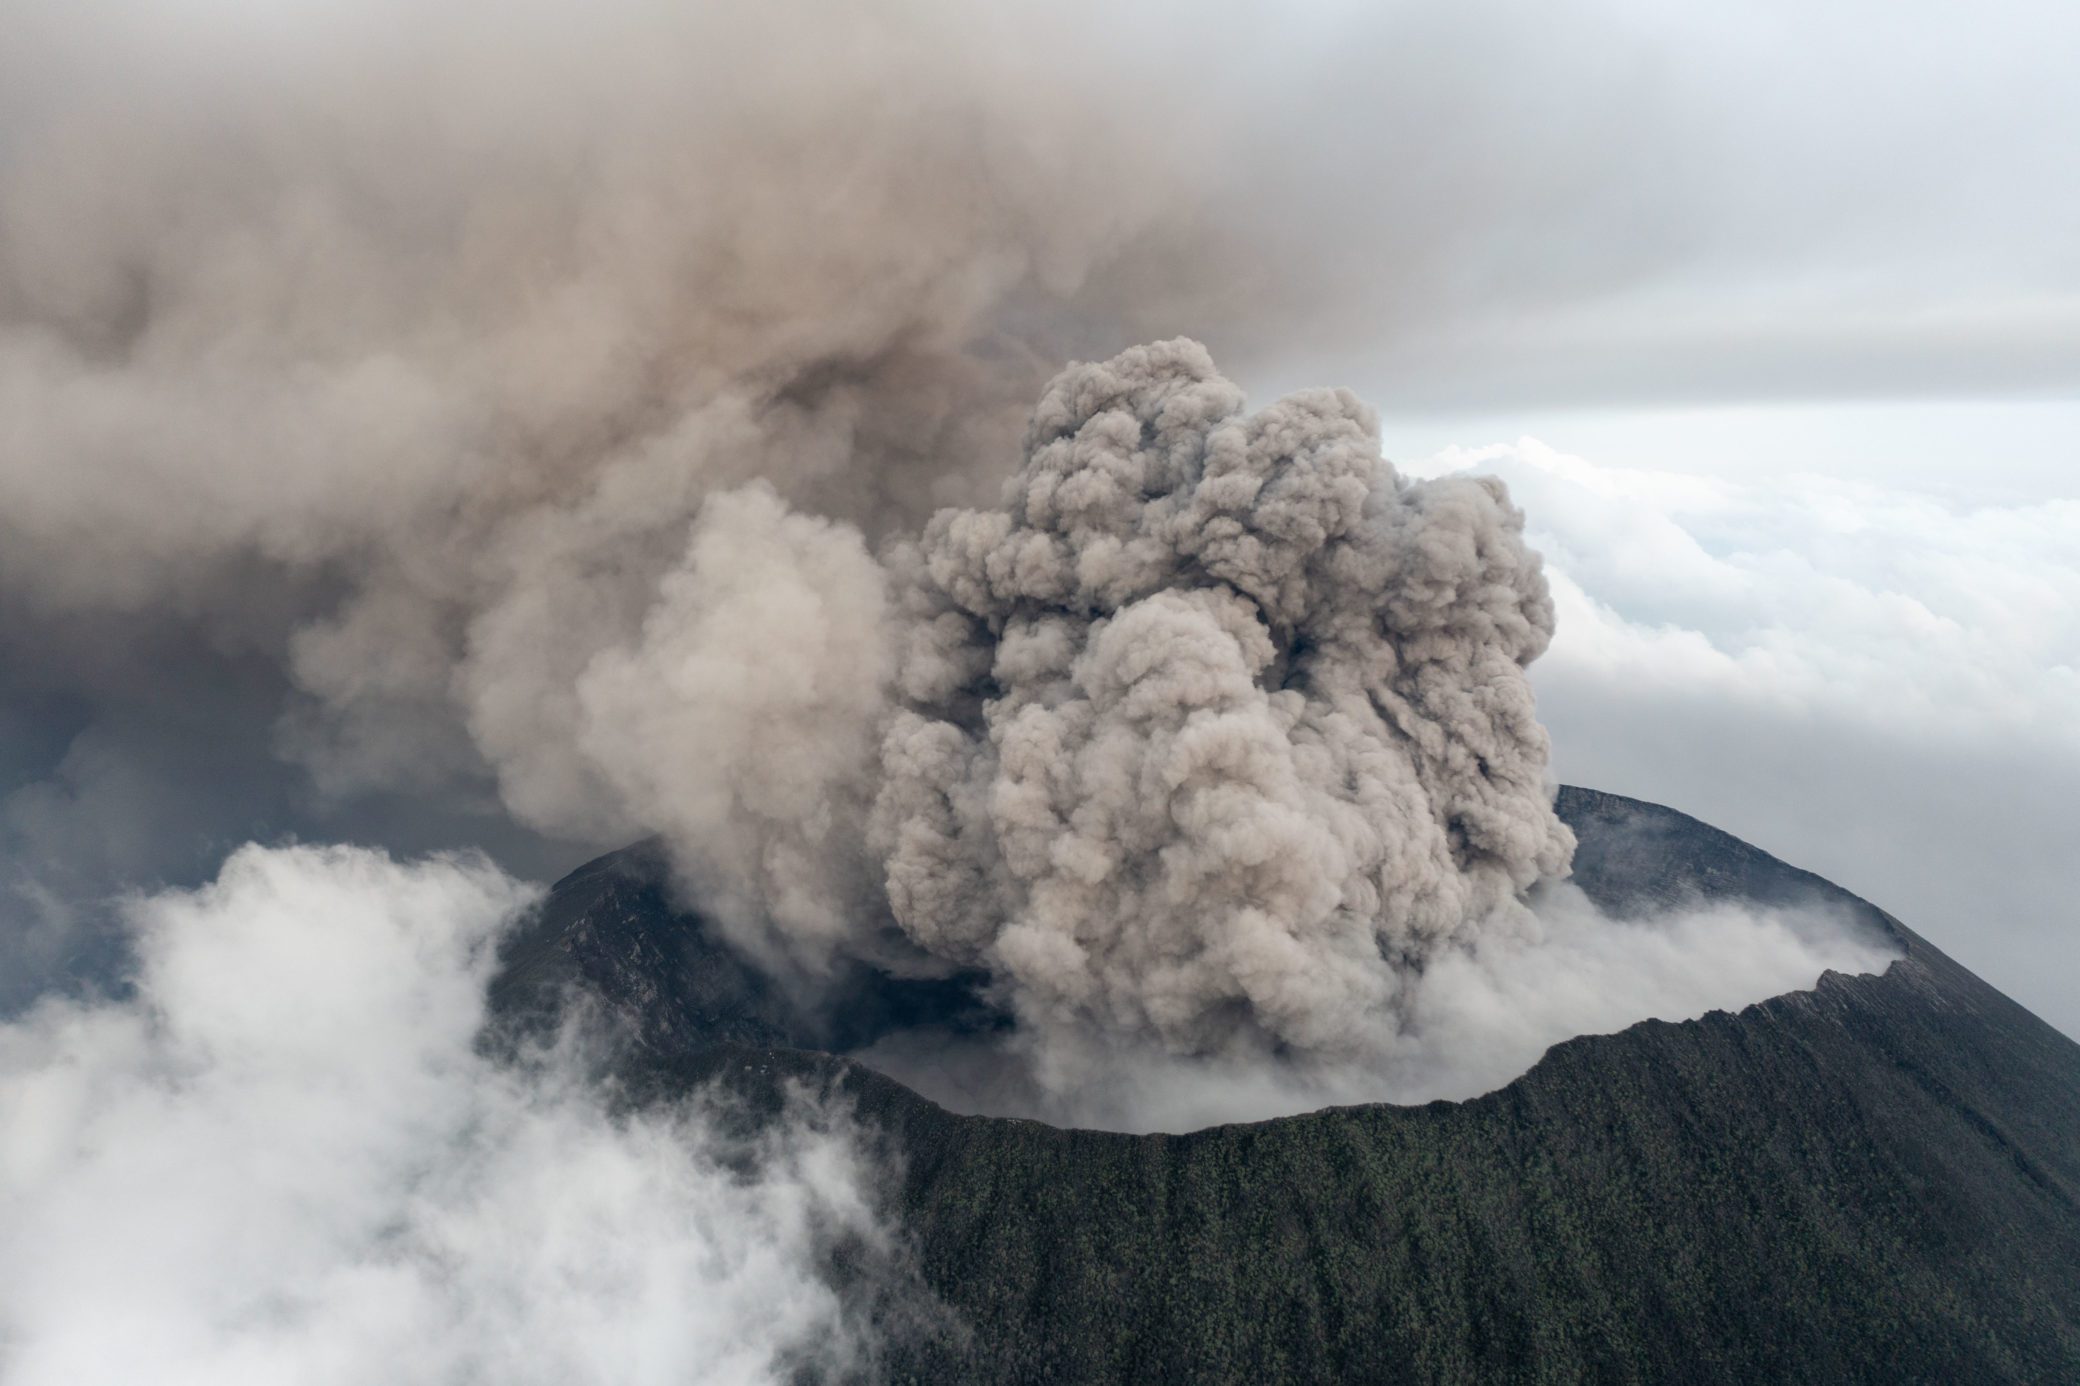 Mt Nyiragongo eruption in 2021 drone image showing ash from the top of the volcano by photographer Christopher Horsley